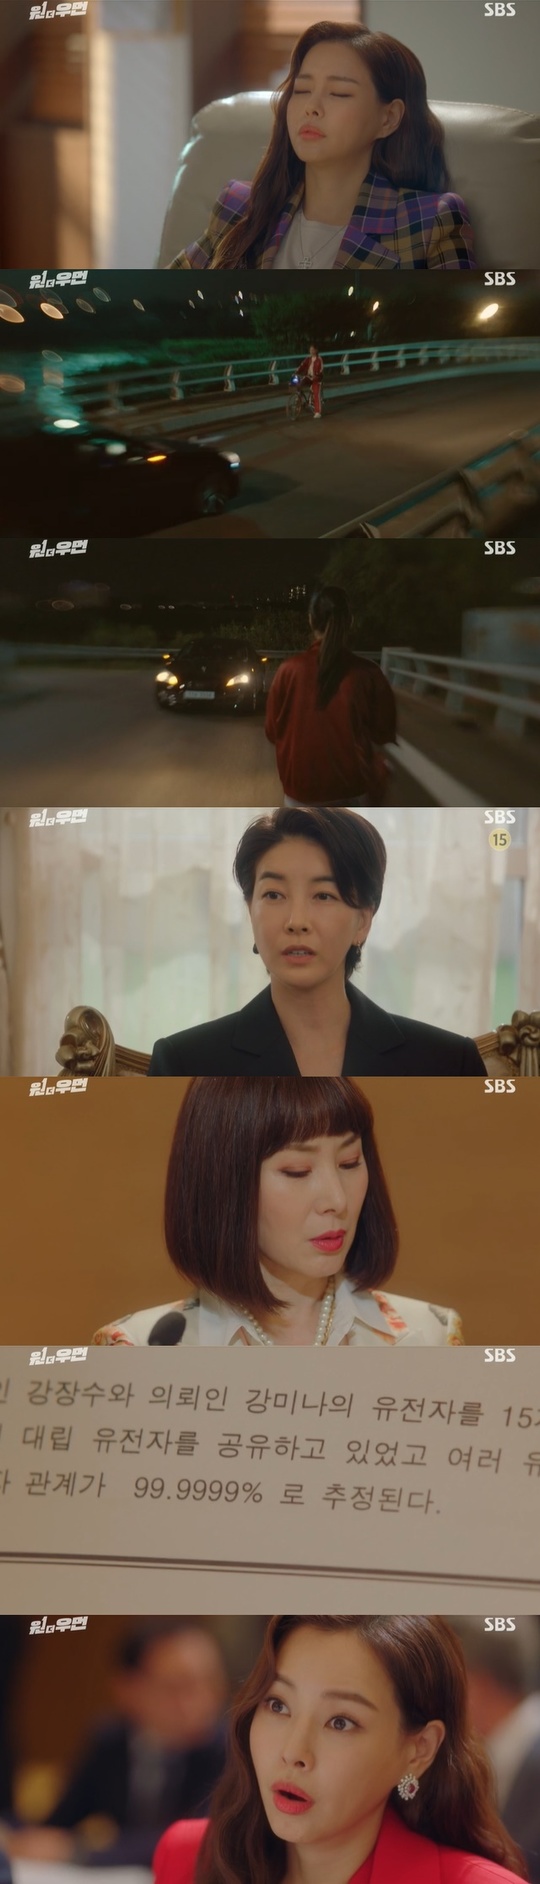 Lee Ha-nui passed the Danger with a genetic test that matched the patternal relationship.In the 12th episode of SBS gilt drama One the Woman (played by Kim Yoon and directed by Choi Young-hoon), which was broadcast on October 23, Cho Yeon-ju (Lee Ha-nui) passed the genetic test Danger as an unexpected result.Kang Myung-guk (Jung In-ki), the father of Lee Ha-nui, told Cho Yeon-ju the truth of the arson at the Seopyeong factory in Hanju 14 years ago.When he was arrested as a suspect in the field, Han Sung-hye (Jin Seo-yeon), secretary of the prison, came to the prison and suggested, How about living quietly with money when you are familiar with gangsters like you?Kang received money for the supporting actor and eventually wrote An Innocent Man unfairly.In this situation, the supporting actor was upset, but he realized that the arson case of the Hanju factory was related to the one week and burned the vengeance.Meanwhile, after threatening han seung-wook (Song Won-seok), Han Sung-hye (Jin Seo-yeon) found out the real name of the supporting actor who is currently acting as Lee Ha-nui.In addition, after confirming the record of the supporting actor, Roh Hak-tae also learned that the supporting actor was the daughter of the arsonist in the Hanju factory, which covered the case.In addition to this, Roh Hak-tae found out that Ahn Yoo-joon (Lee Won-geun) was reinvestigating the arson case at the Hanju factory by contacting the head of the city council, who knows well.In the meantime, Cho Yeon-ju heard the whole story of the arson case 14 years ago, and Kang Myung-guk, who wrote the office theft case An Innocent Man only because he had a criminal record at the time.The company, which was scheduled to come to a high person, paid Kang Myung-kook to pay his salary next month to cover this work, and Kang Myung-kook went to the company in the middle of the night with gasoline, saying that he would burn the money in front of everyone.However, Kang Myung-kook left without setting fire to Grandmas Boy.Kang Myung-kook, who turned around from the factory, first discovered the scene of the fire and went back to the factory. But there was a strange feeling.It seemed like something had changed before. There was a fashion mark on the cover and it seemed like an account book. The ledger questioned Cho Yeon-ju and han seung-wook.Han Young-sik (Jeon Gook-hwan) told young Han seung-wook that han seung-wooks father died because he could not get out because of the account book inside.The two doubted Han Young-sik the most because he was working as an article by Han Young-sik at the time and Han Young-siks alibi was manipulated at any time.Cho Yeon-ju also suspected Han Yeong-sik as a Grandmas Boy Hit-and-run criminal.Since then, the supporting actor has met a book review firefighter who has been in good shape and heard about the scene of the Agnaldo Timóteo incident.The firefighter said: The deceased (Han Seung-wook father) is probably trapped by the fire Shutter coming down; when there is a fire, casualties are found in many exits or windows.So there was no strange thing that was there, but I groped the door of the fire and found it or knocked on it, but there was no sign of it in the shutter.Even if I had spent all my strength coming out there, I was lying too straight to do so. They knew that Han Young-sik did not ask for an autopsy of his father.In the meantime, Cho Yeon-ju was hypnotized to recall Agnaldo Timóteo as the only witness on the day of the fire at the Seopyeong factory.Cho recollected the car that might have been the killer of the fire at the Seopyeong factory and Grandmas Boy Hit-and-run, and said, The car emblem looks like a beetle.I see 5 and 8 (on the license plate), he said. The car was a Baro Han Yeong-sik car.Cho said, Han Young-sik hit Grandmas Boy while riding alone and Ryu Seung-deok covered it.The supporting actor then carried out the surprise when he was chewed he used to use when there was no evidence; Baro break in once there was no evidence.After that, Han Seung-wook met Han Young-sik as the supporting actor said, Did not you come to the Seopyeong factory on the day of our fathers death?However, Han Young-sik proved his alibi if he was with Agnaldo Timóteo Kim (Kim Kyung-shin, Je Su-jeong).Meanwhile, Han Sung-hye said in front of the family where Han Seung-wook left, Everyone played with a woman pretending to be an All-Kane, everyone will know after the shareholders meeting.There was a suspicion among the family that the supporting actor was a little strange.Kang Eun-hwa, who was convinced that the supporting actor was a fake, said, I tested and found a serious fact that I could not just pass on.I changed the test paper later, but I did not do it. I will open it here. But the result was a 99.9999% estimate of biological paternal relationship.